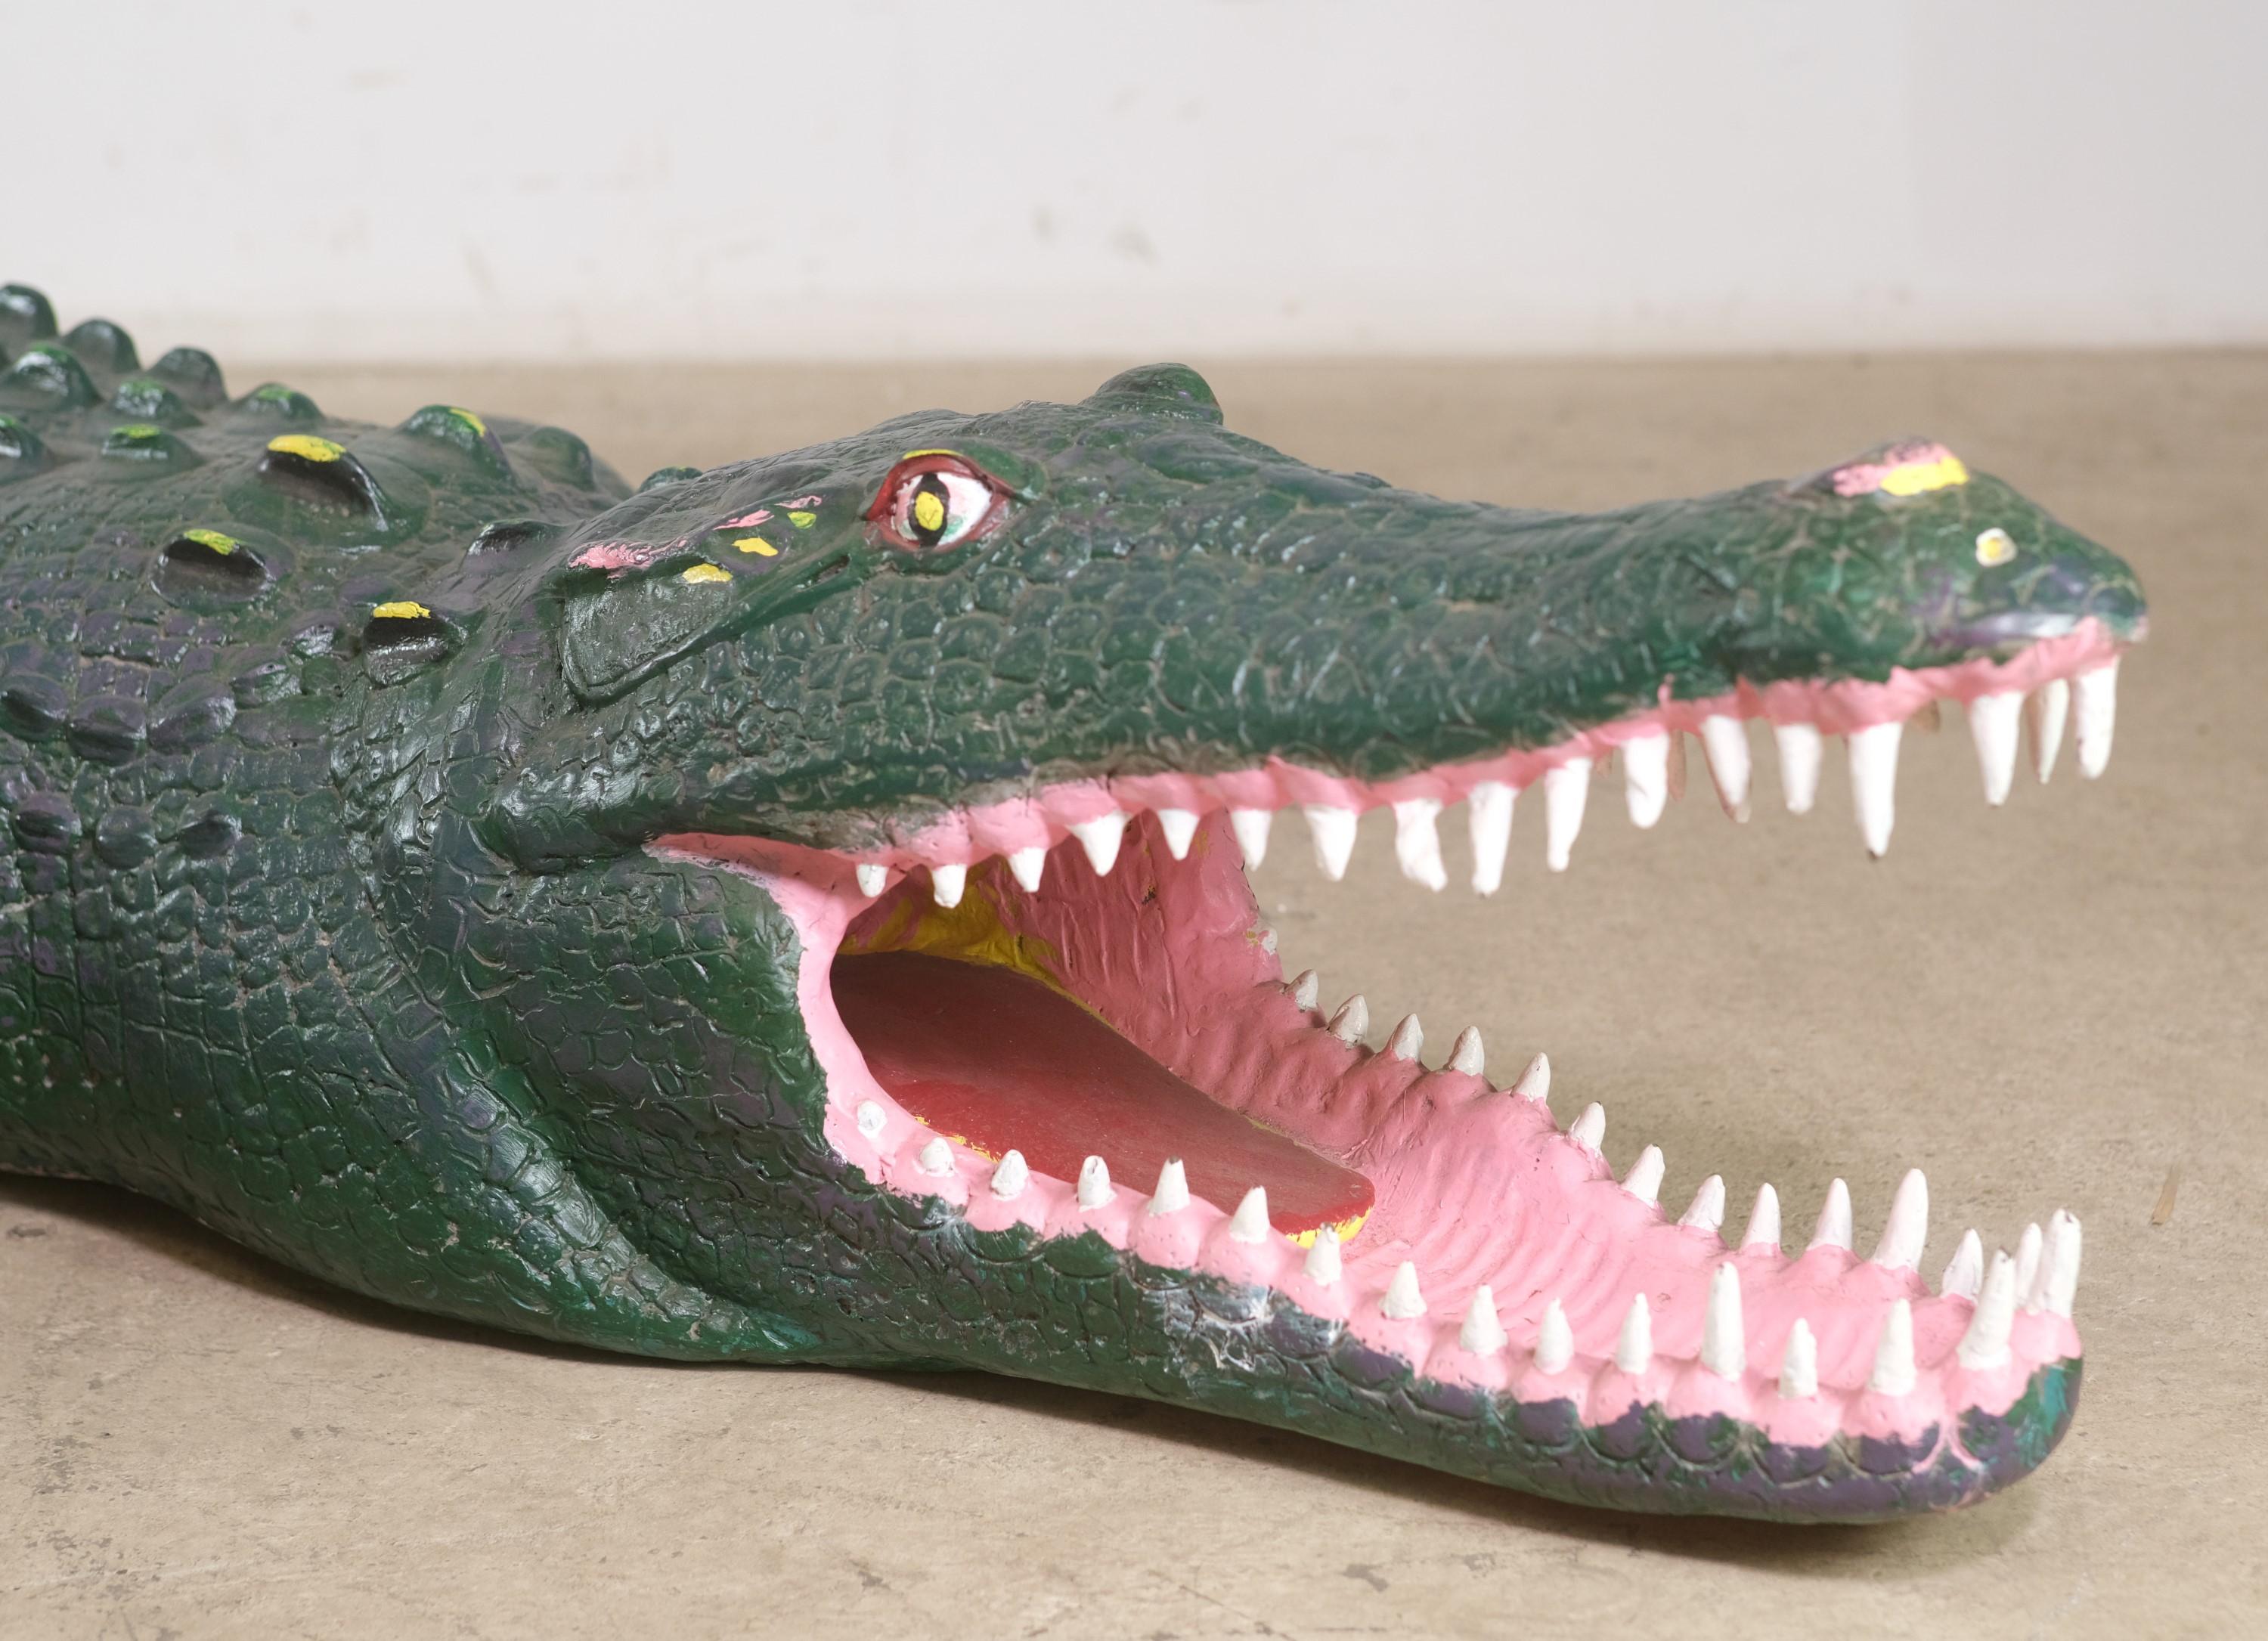 Life size and life like weatherproof crocodile. Hand painted made out of Fiberglas. Complete with open mouth with teeth. Here's looking at you! Please note, this item is located in our Los Angeles, CA location.